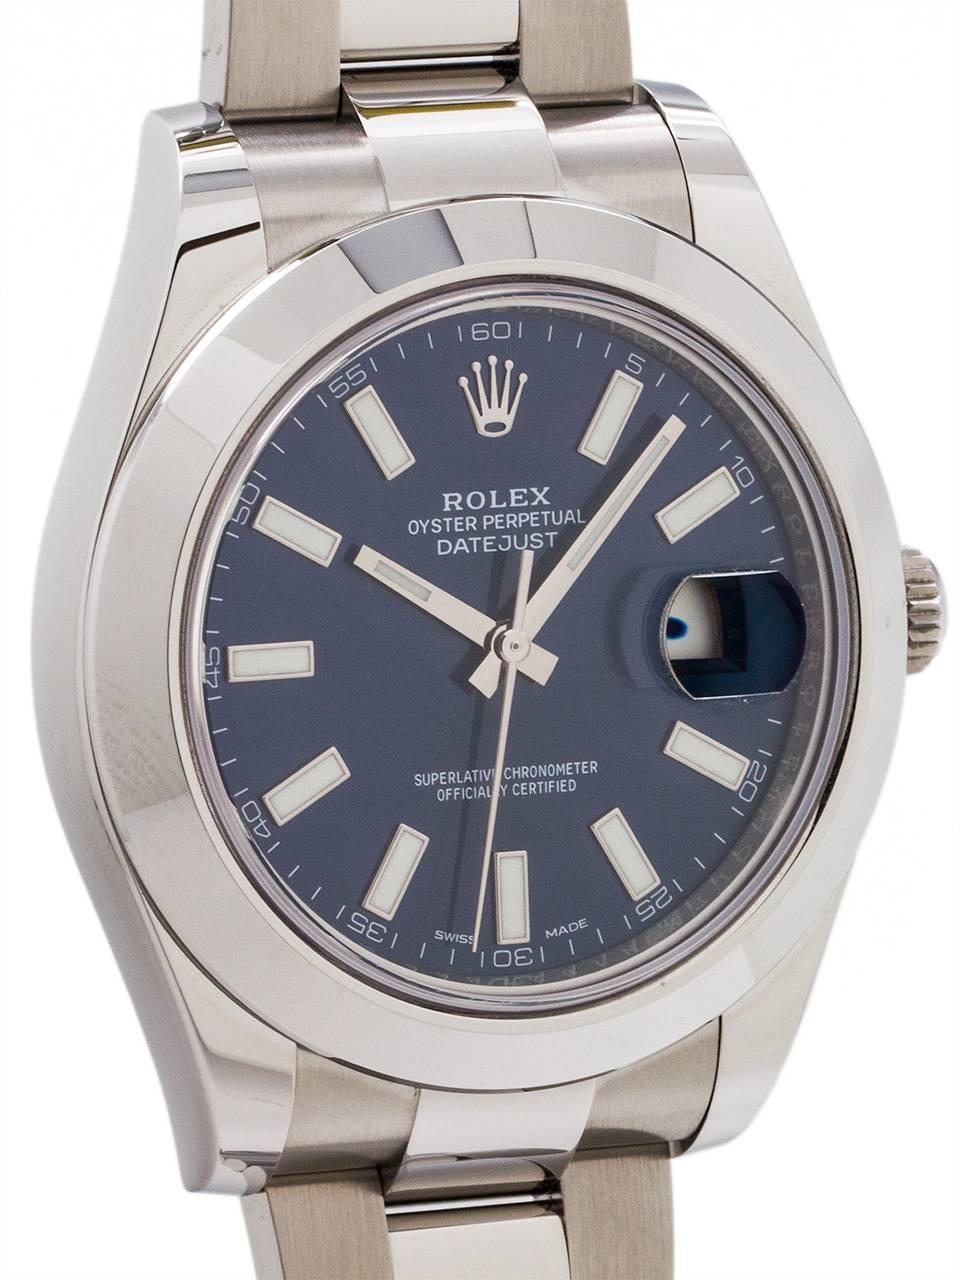 
Rolex Datejust II stainless steel ref # 116300 circa 2016. This is the current large 42mm diameter case with smooth dome bezel, sapphire crystal, and especially beautiful original sapphire blue dial with large luminova indexes and  baton hands.